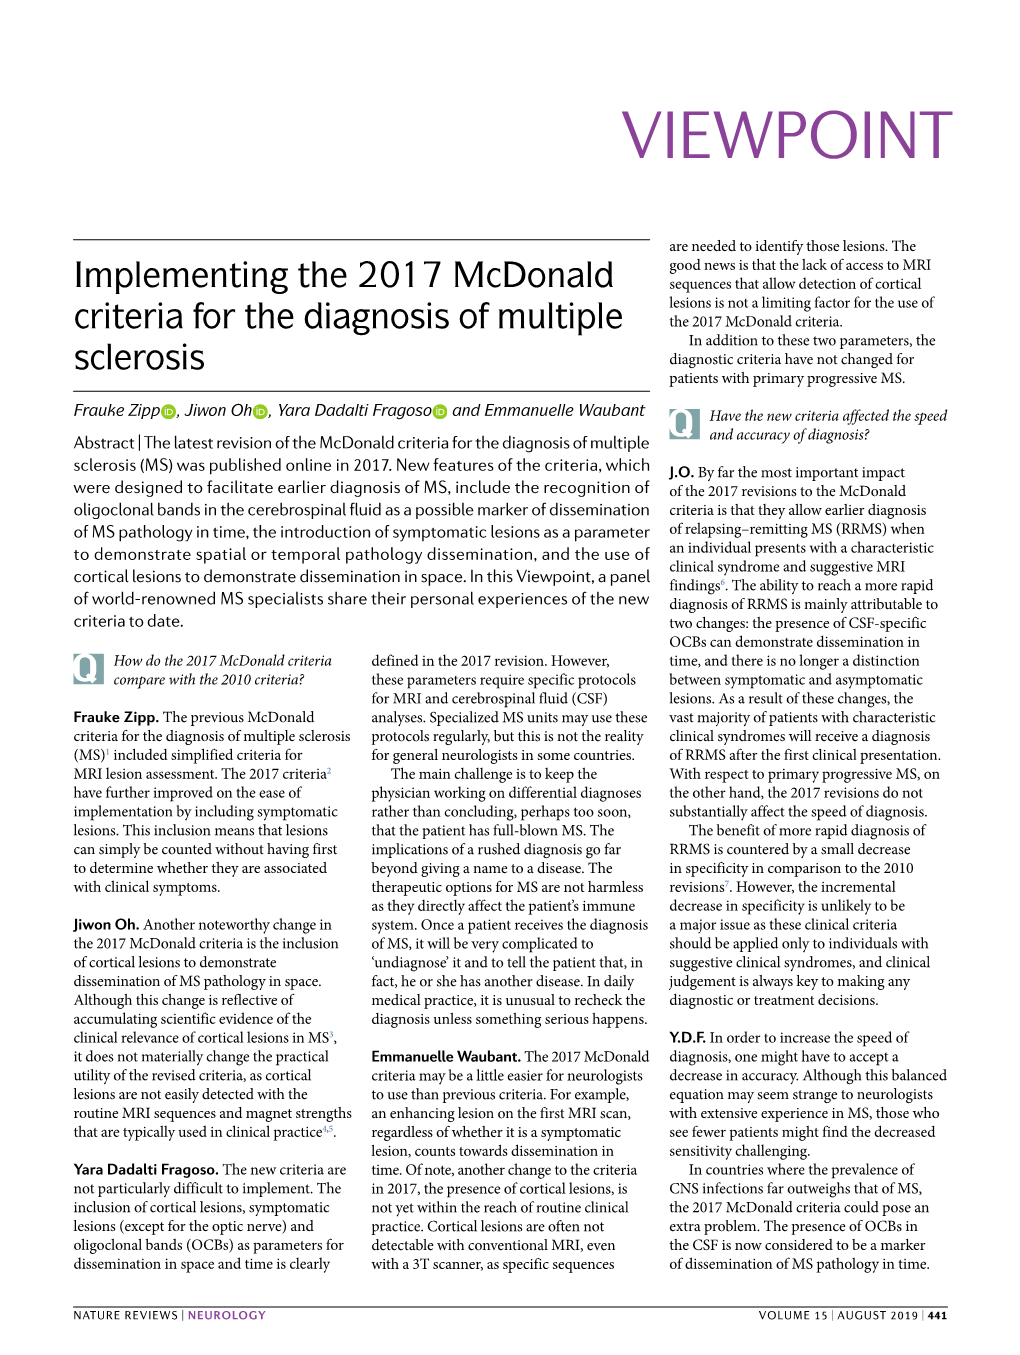 Implementing the 2017 Mcdonald Criteria for the Diagnosis of Multiple